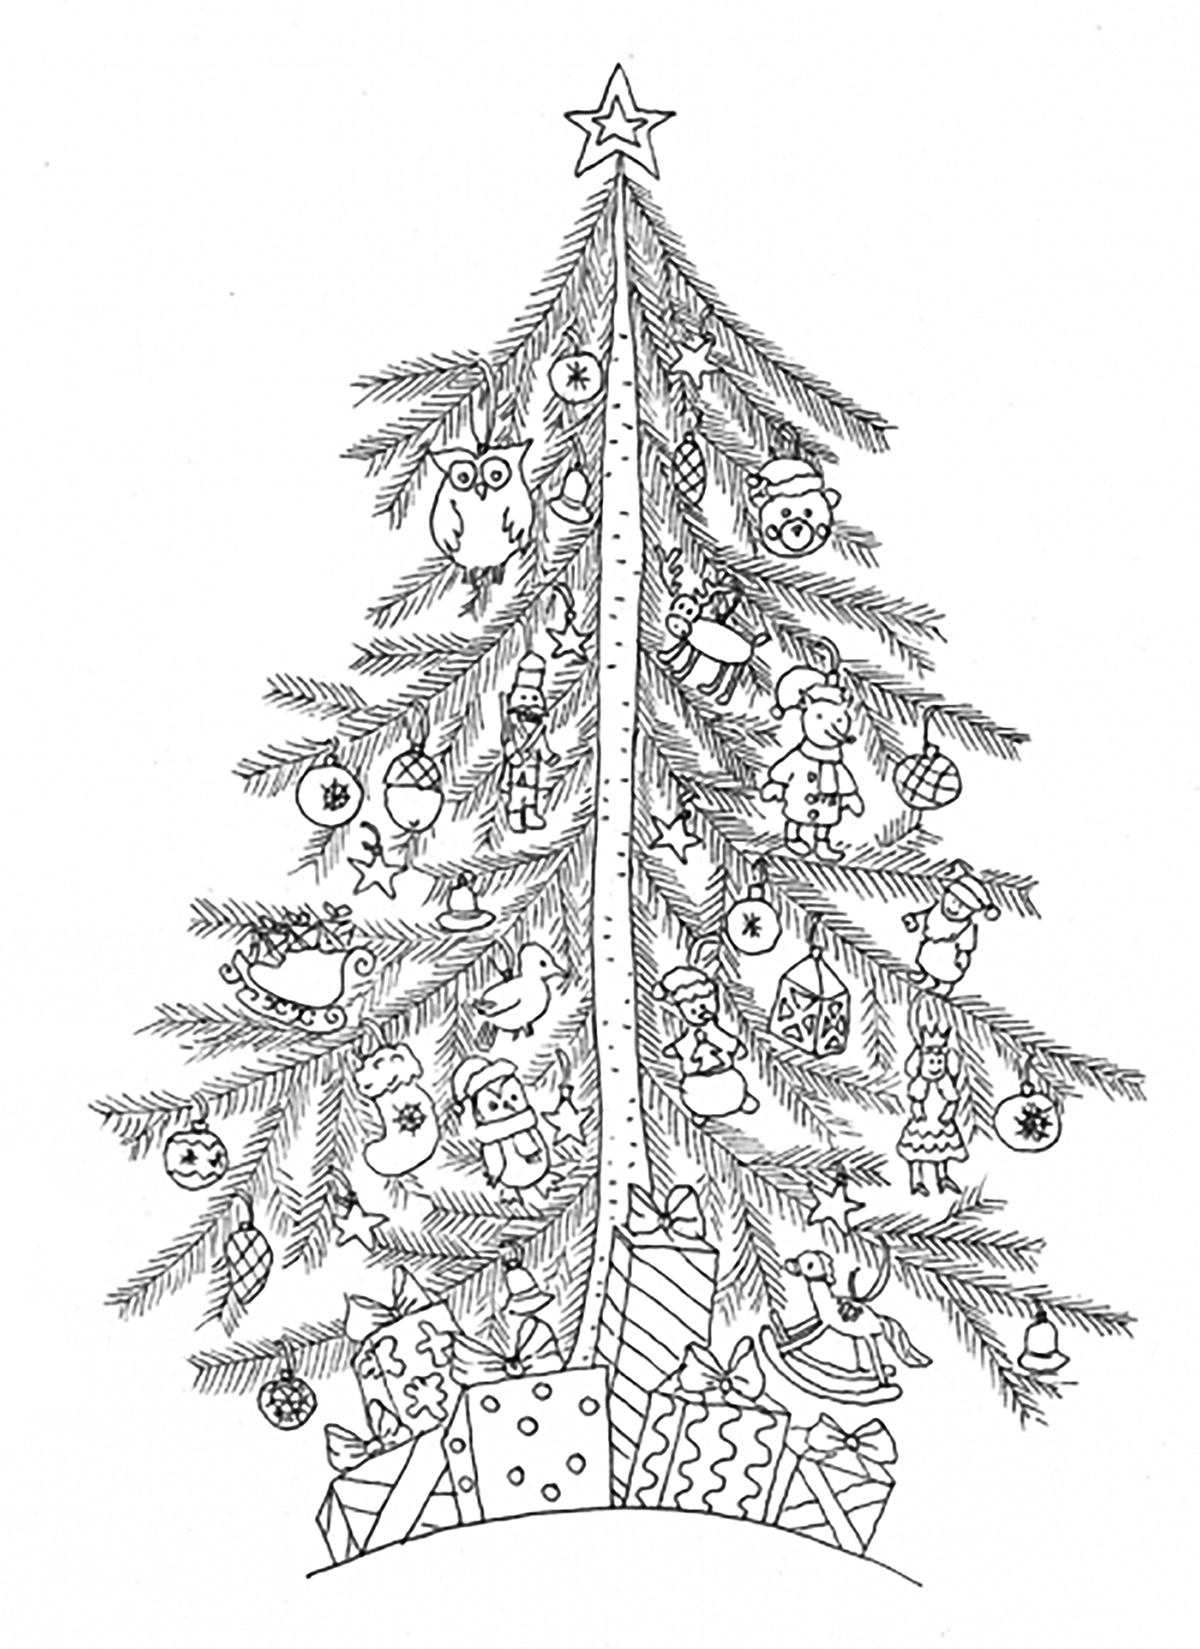 Tree Coloring pages - Coloring pages for adults | JustColor